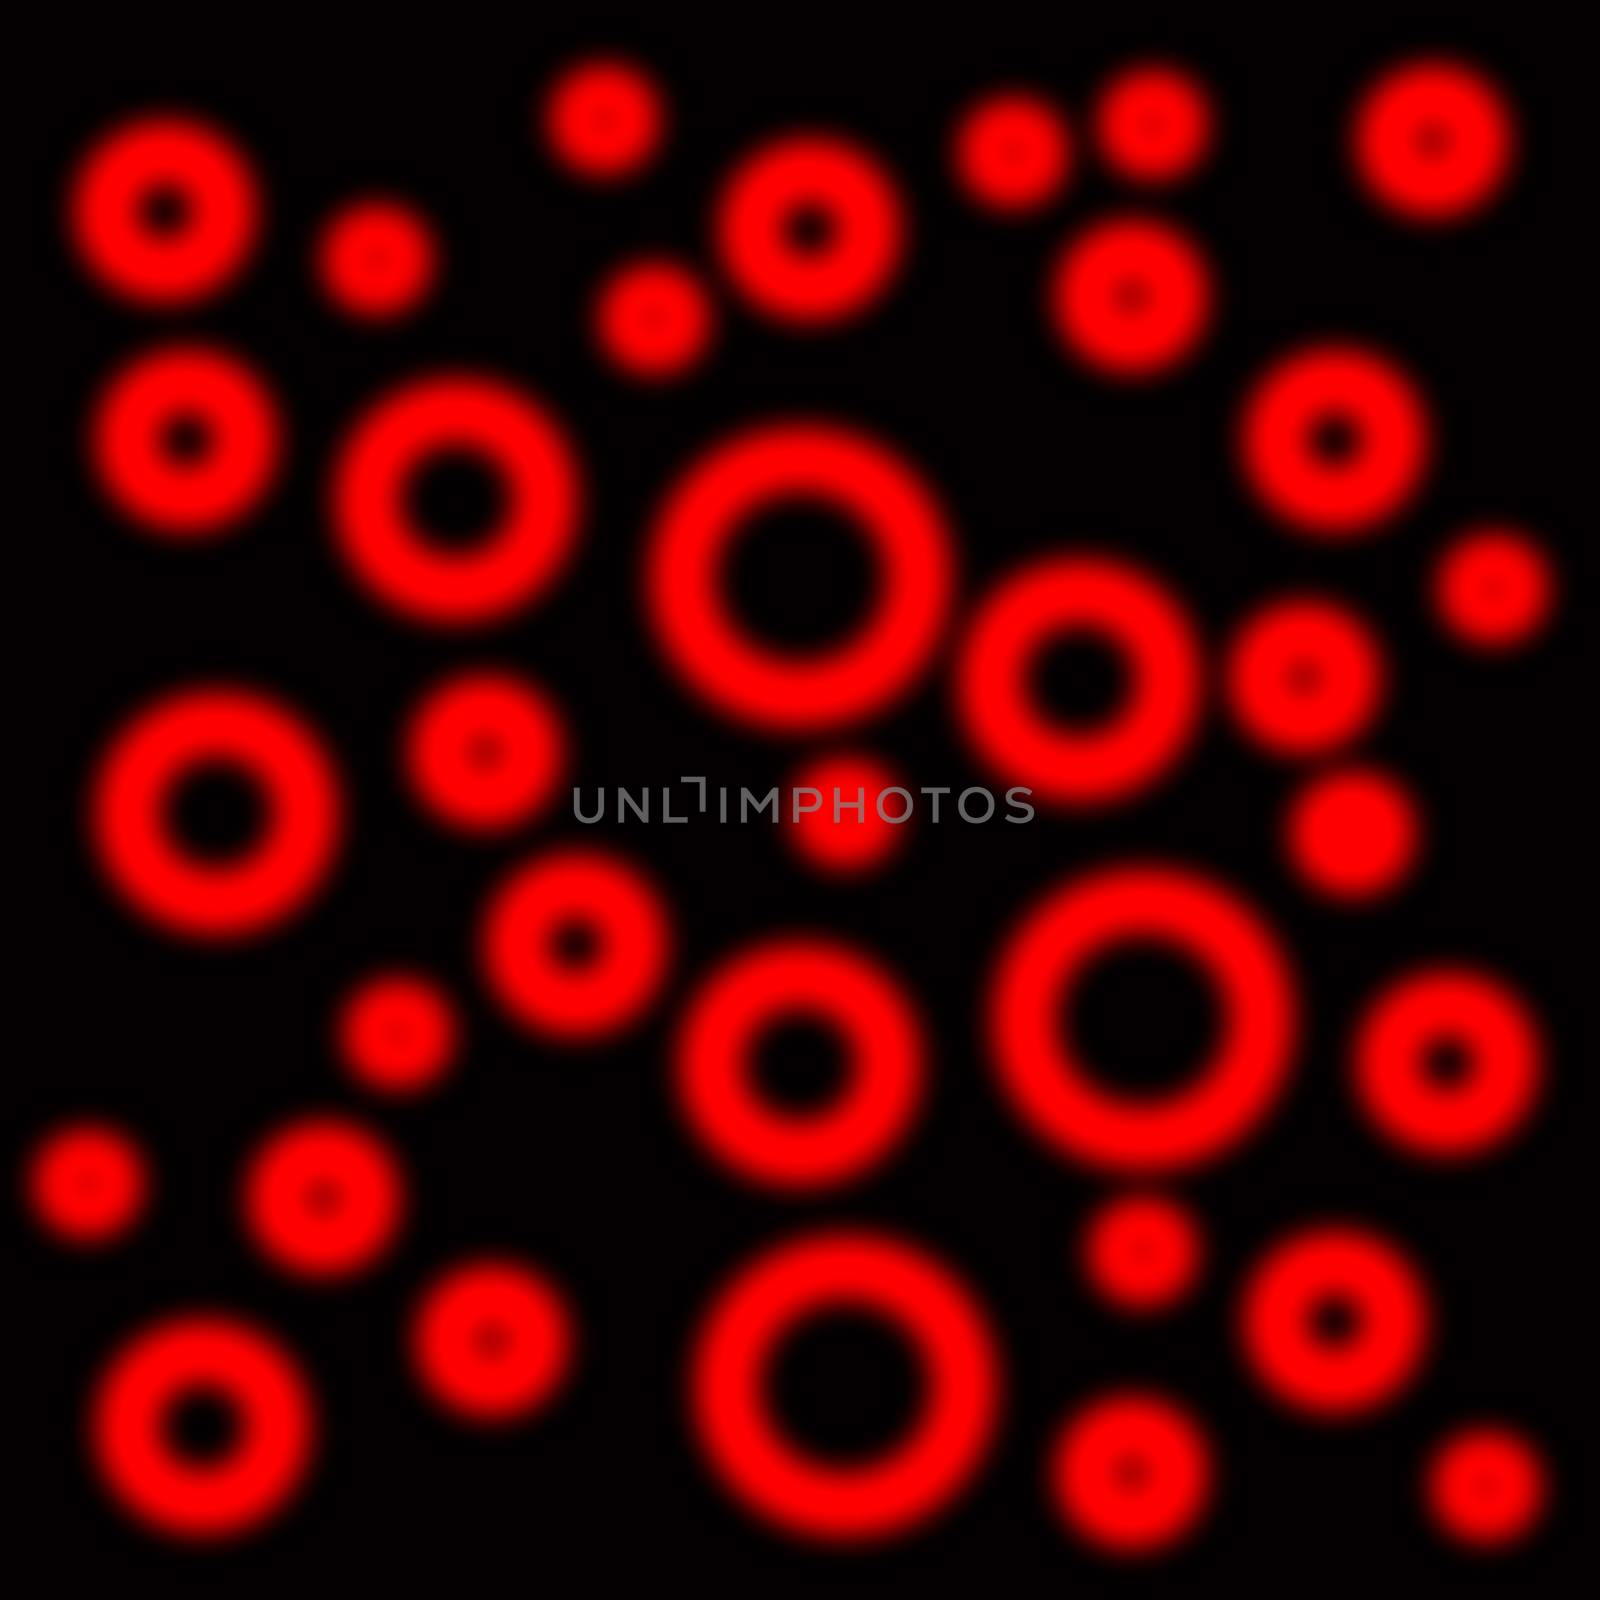 Red circles on black background by Nobilior